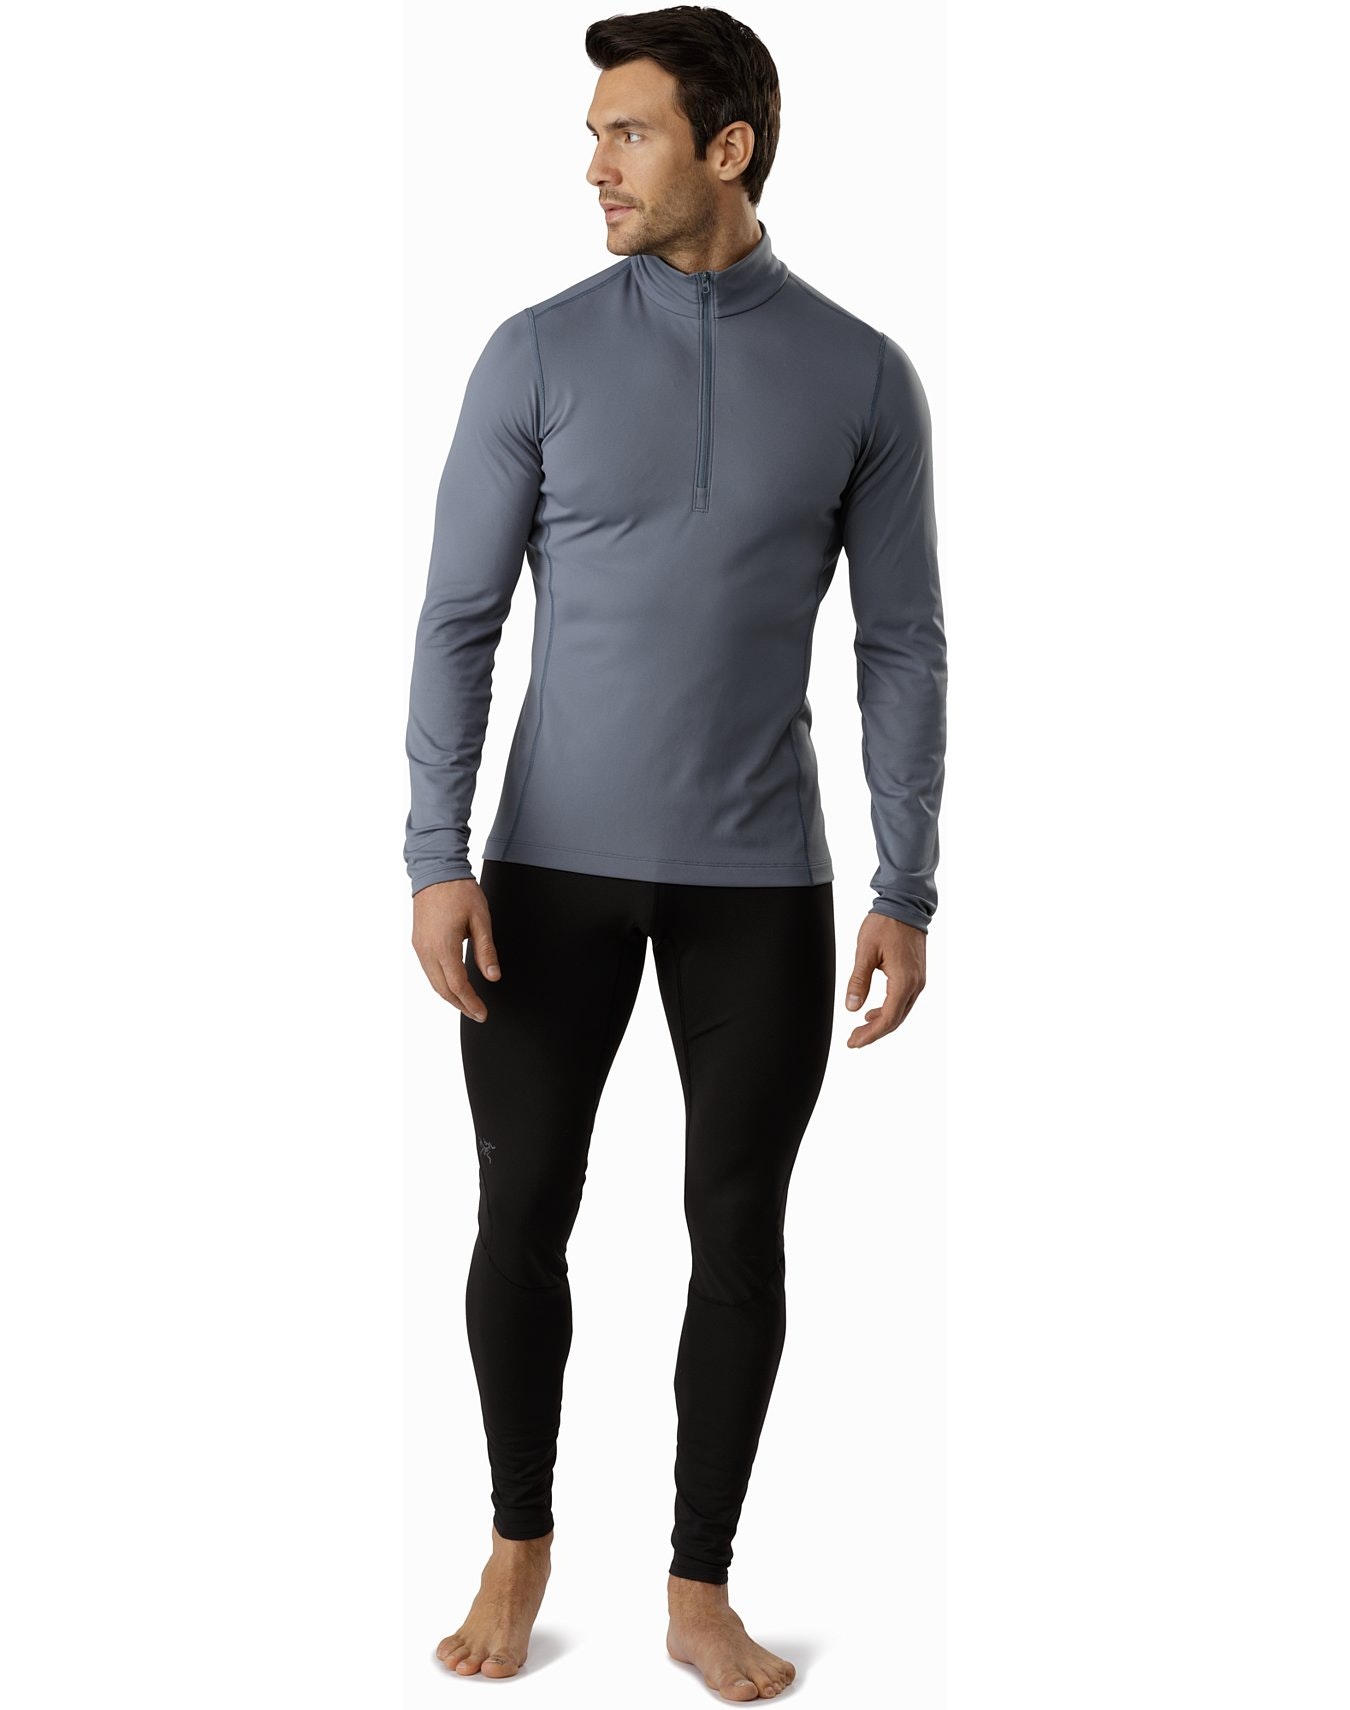 The Phase AR Zip Neck with a high colour and a deep zip to control body temperature. Gear Review: Arc’teryx’s base layers for the season. 